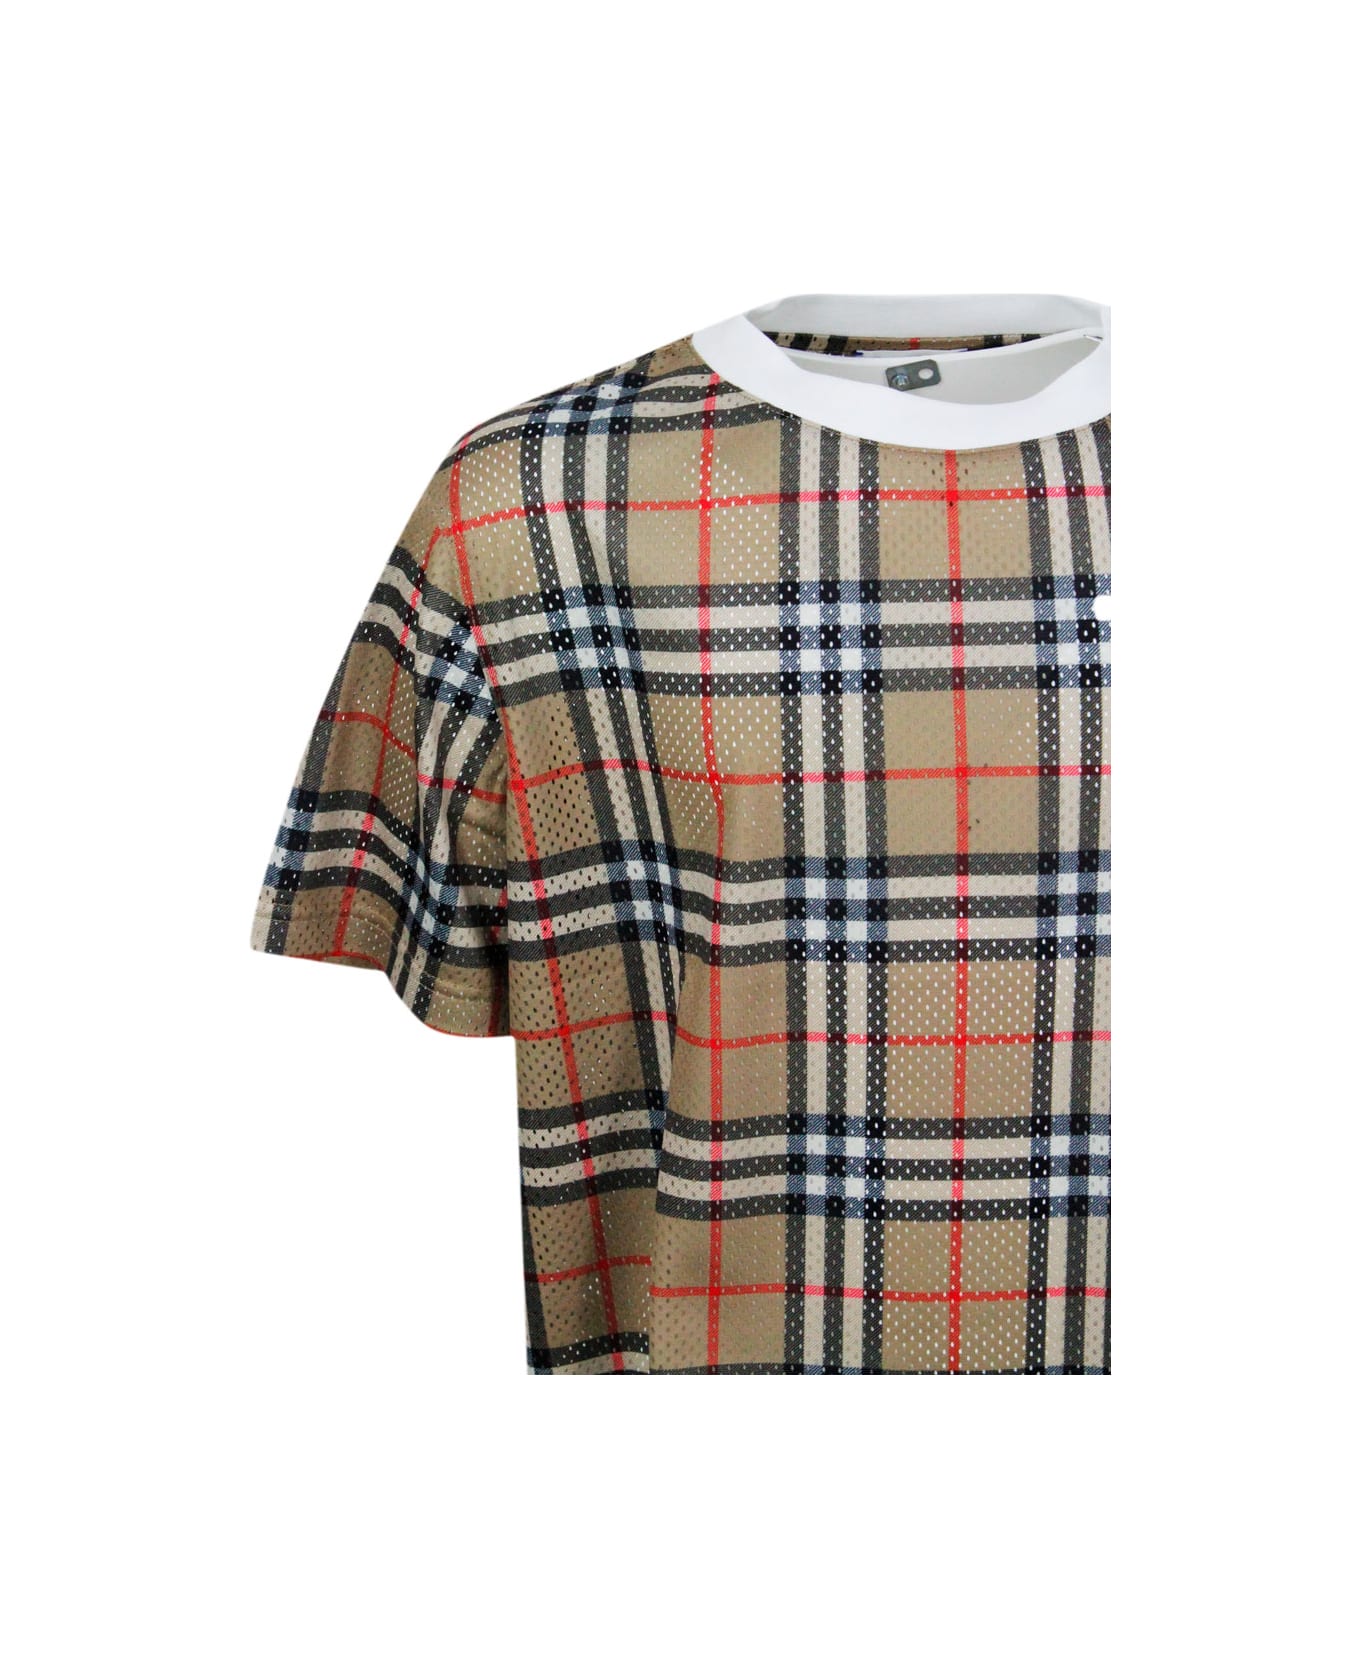 Burberry Crew-neck, Short-sleeved T-shirt In Perforated Fabric With Chekc Motif. - Beige Tシャツ＆ポロシャツ